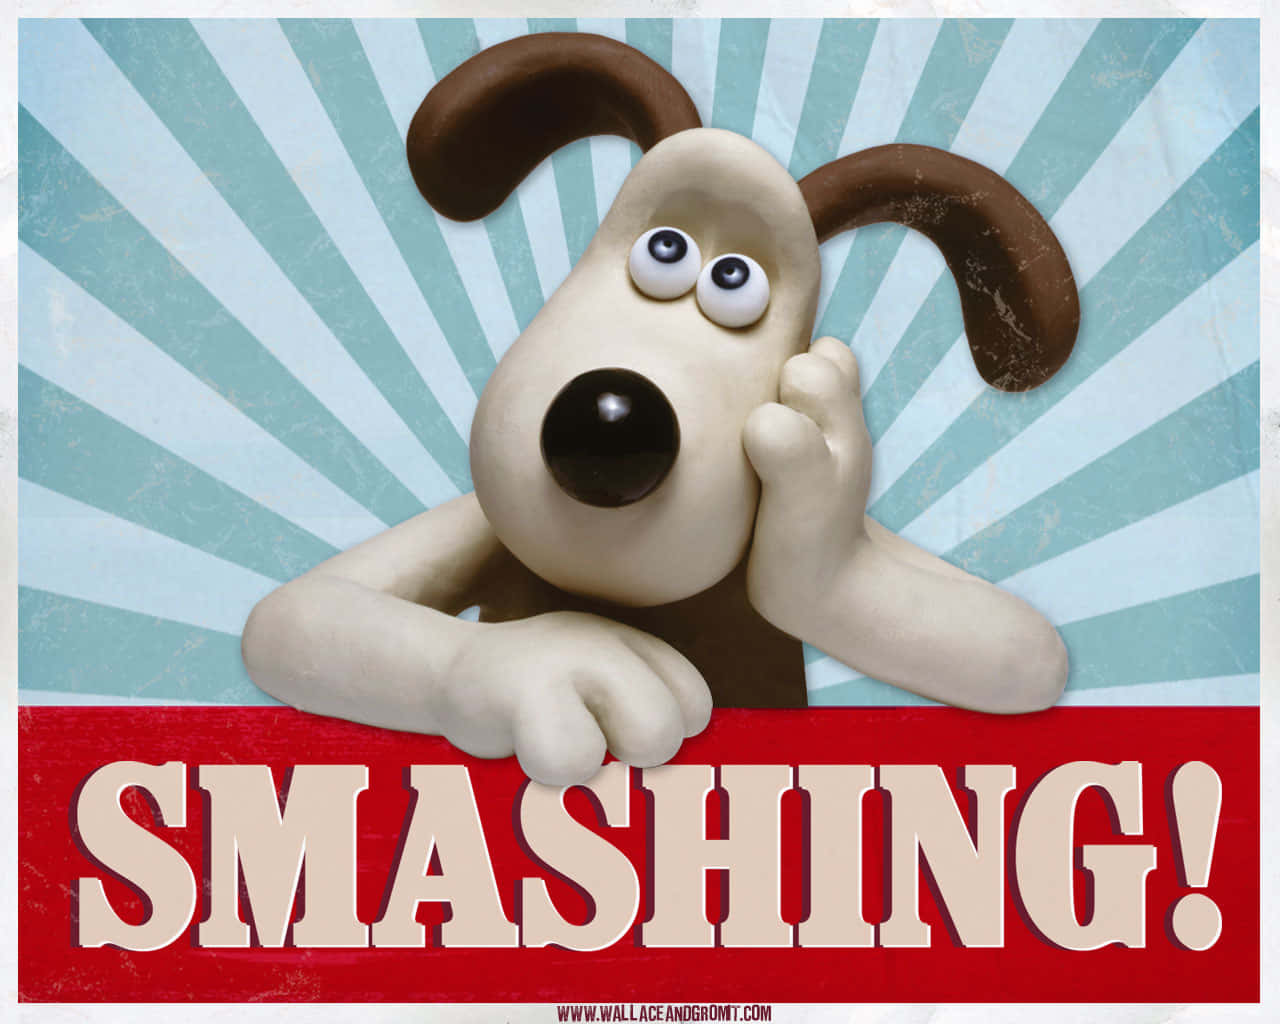 Wallace & Gromit The Curse Of The Were-rabbit Smashing Poster Wallpaper